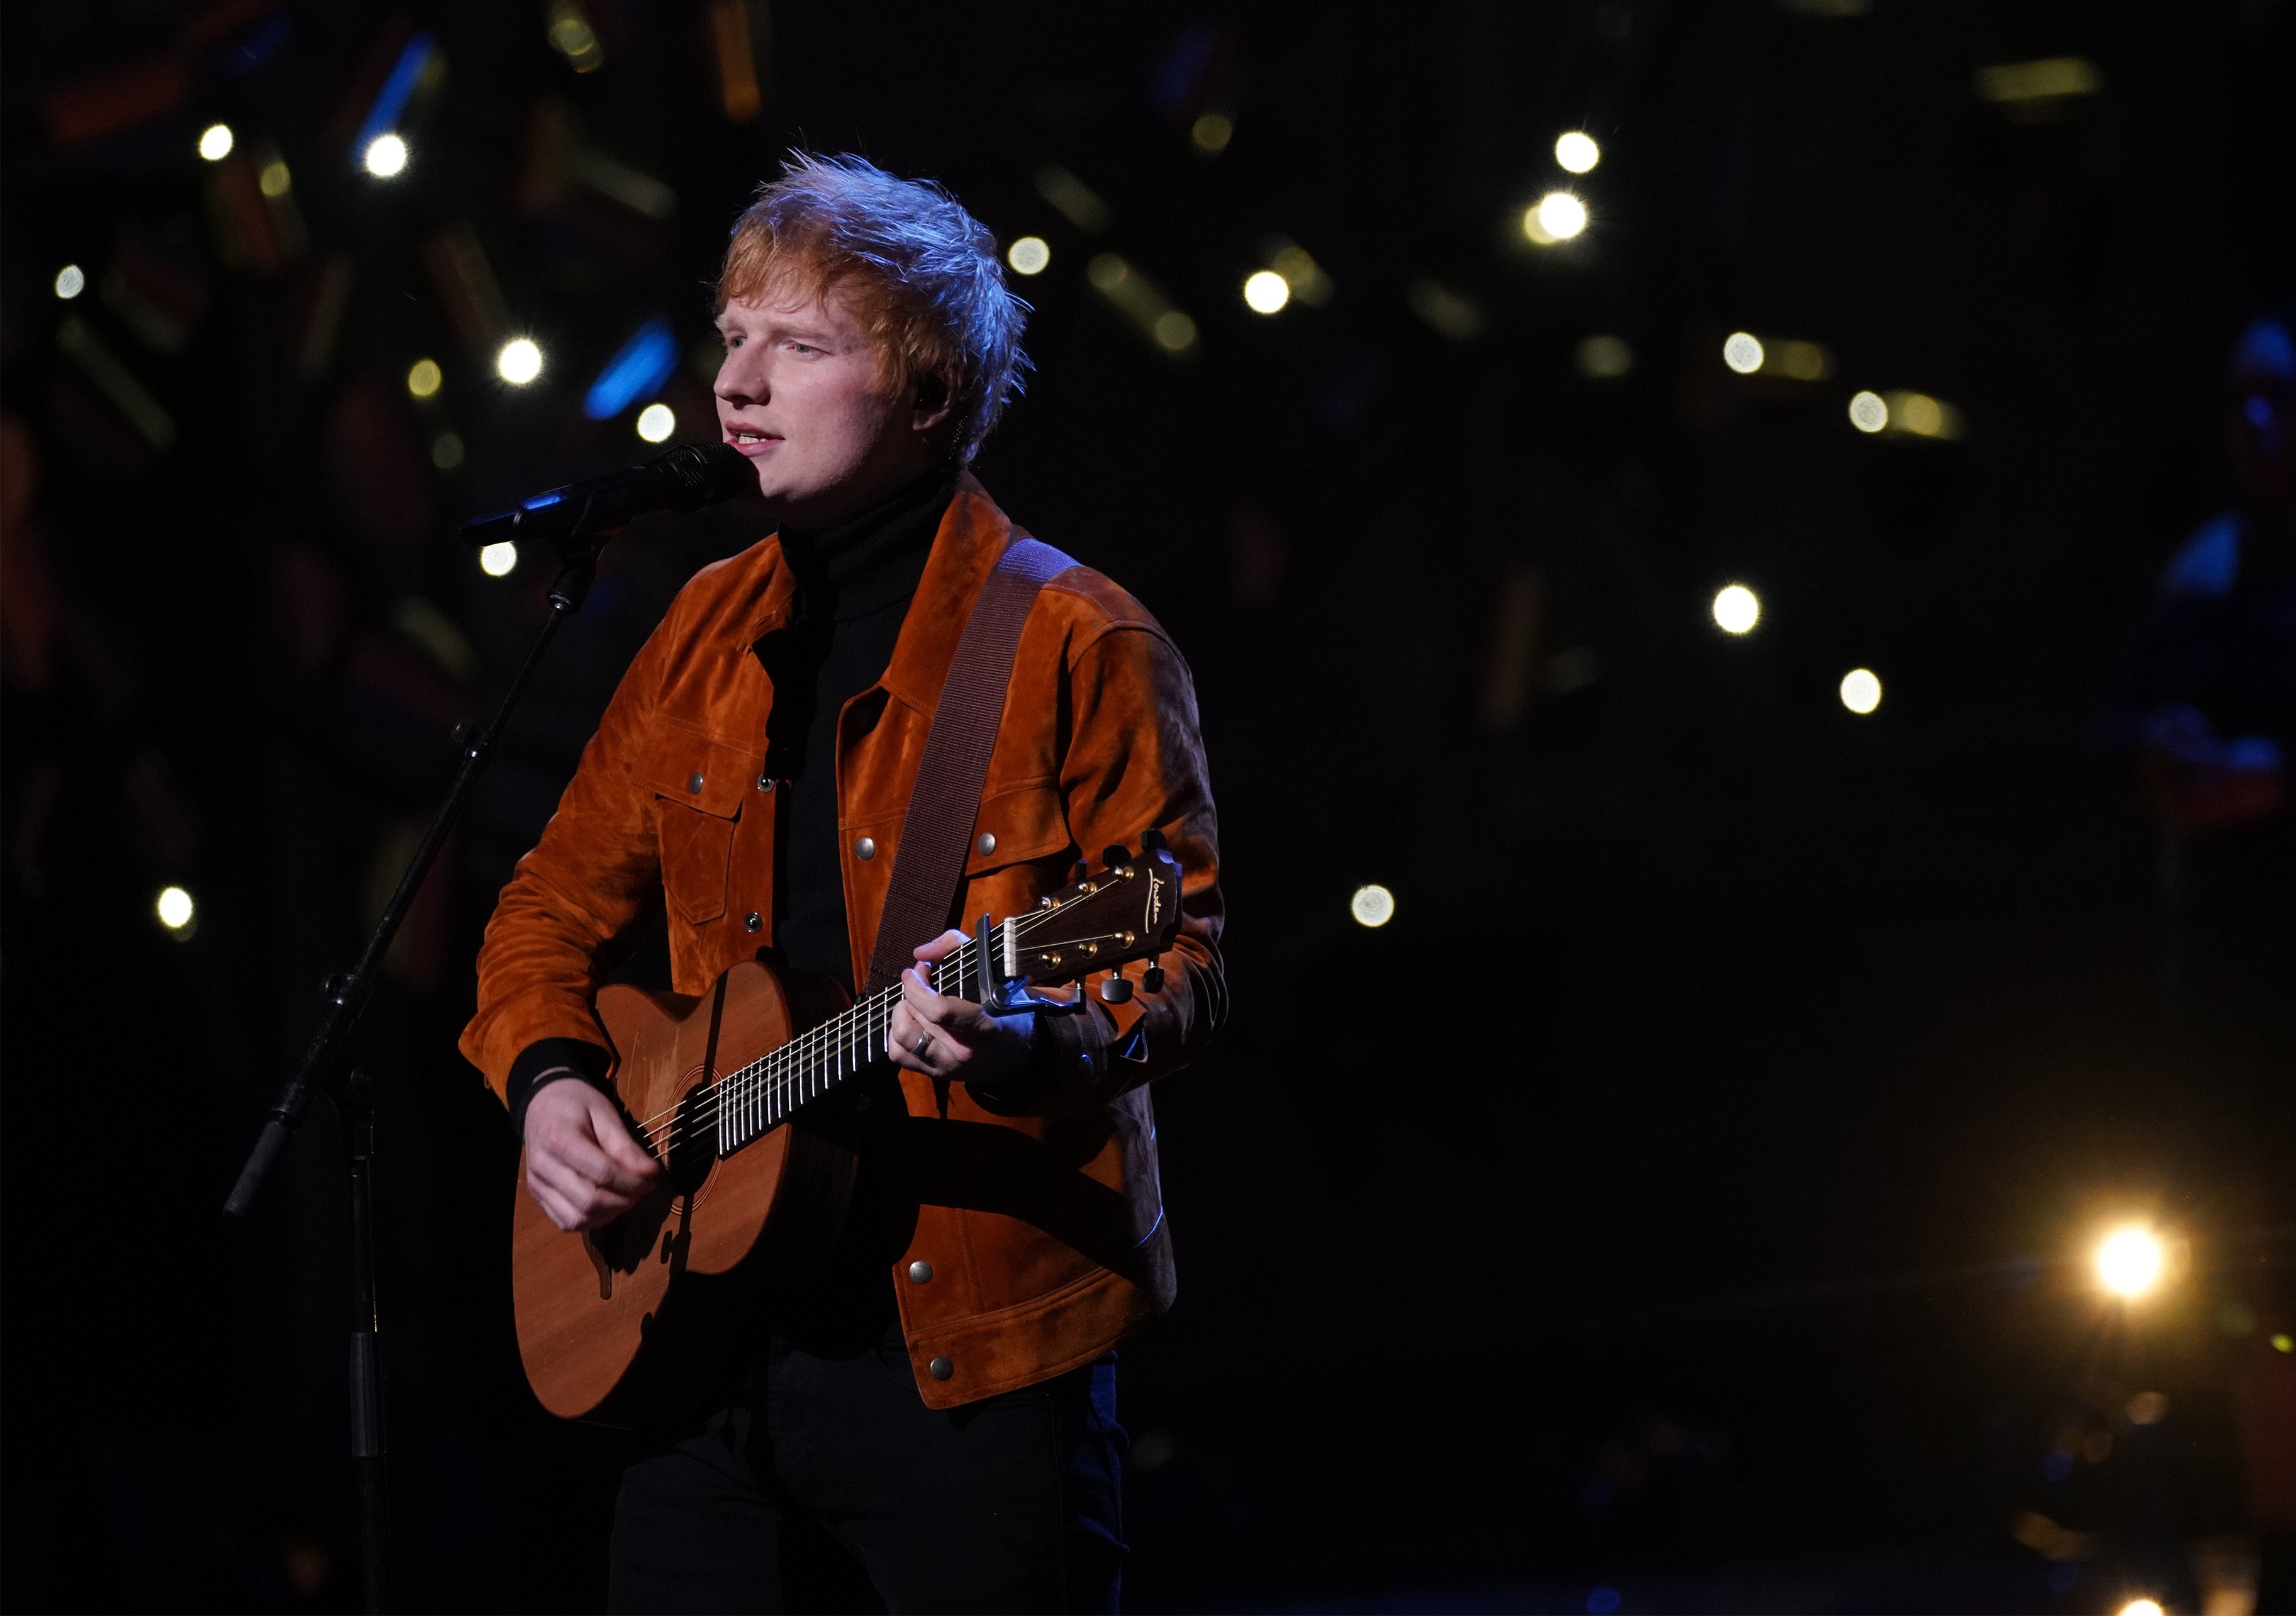 Ed Sheeran performs on stage at the Earthshot Prize awards